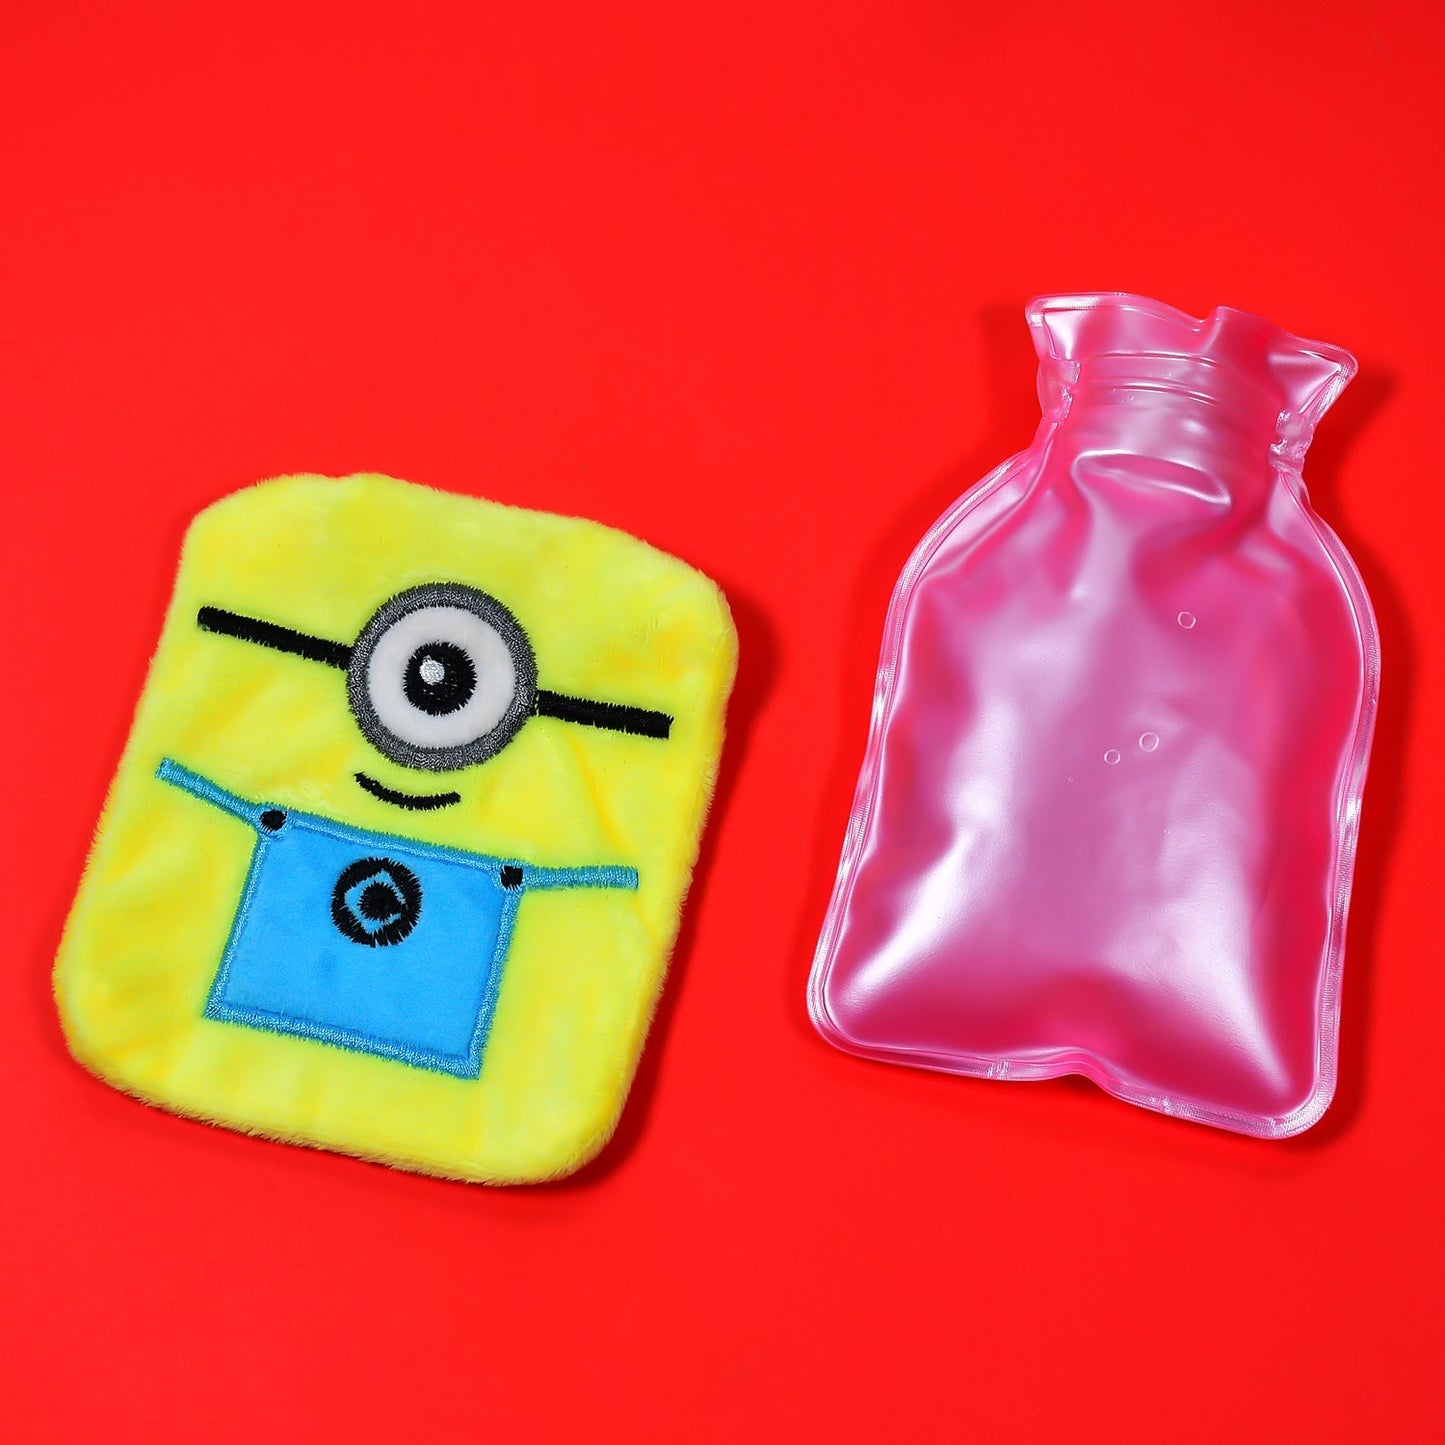 6506 Minions small Hot Water Bag with Cover for Pain Relief, Neck, Shoulder Pain and Hand, Feet Warmer, Menstrual Cramps. DeoDap